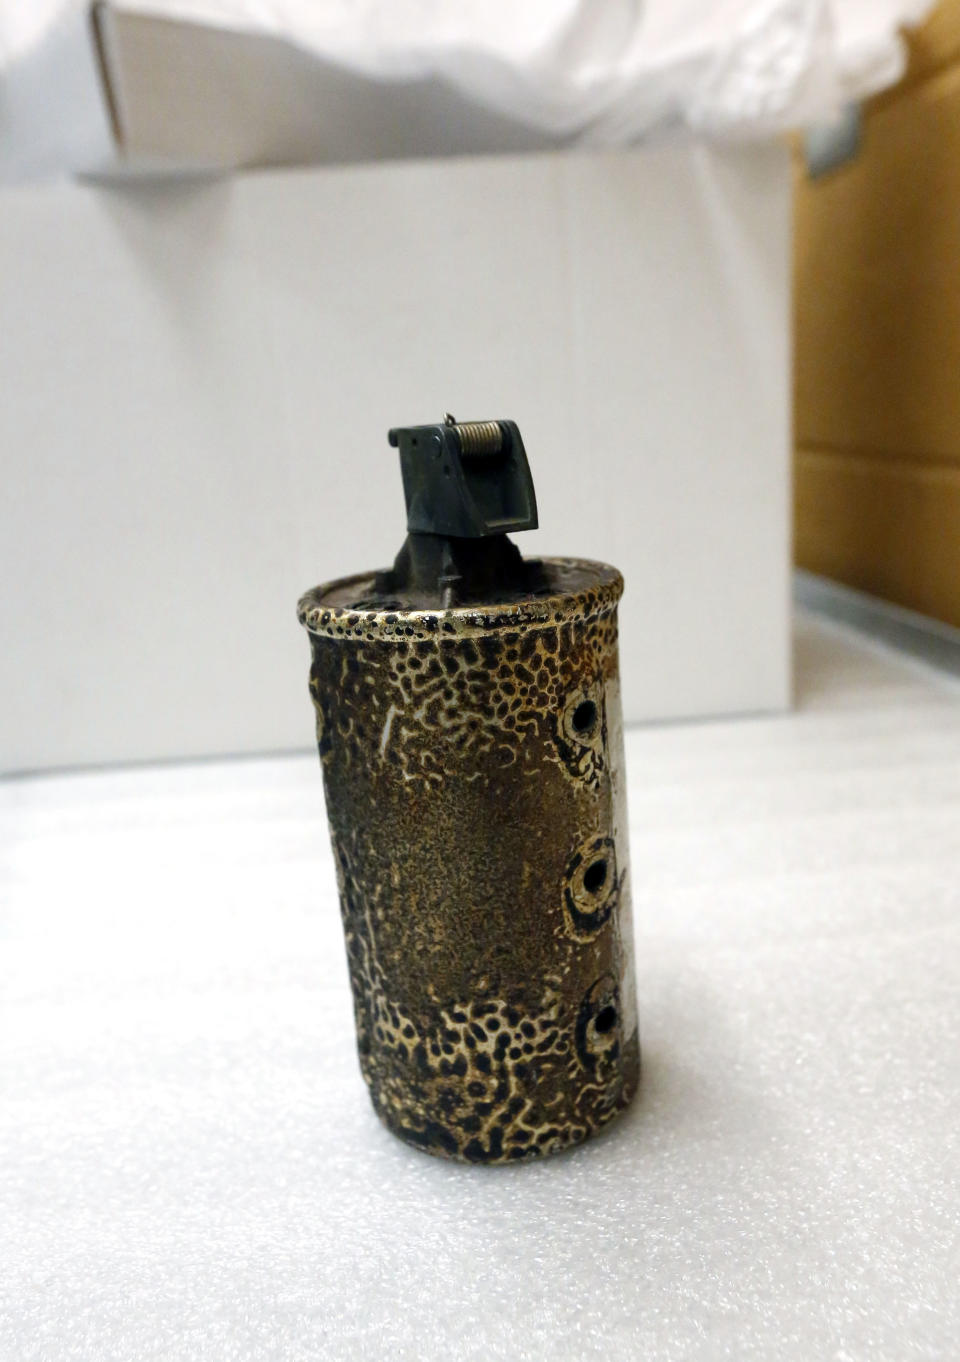 In this Oct. 11, 2013 photograph, a spent tear gas grenade used by U.S. Marshals to try to quell the 1962 riot at the University of Mississippi campus over the registration of James Meredith, a black man, as a student, will be among the items that will eventually be displayed in the civil rights museum in Jackson, Miss. Officials say they did not set out to have separate-but-equal museums for the documentation of the state's history, but it could end up that way. Mississippi breaks ground Thursday. Oct. 24, 2013, on side-by-side museums that are expected to break ground of their own in how they depict the Southern state once rocked by racial turmoil. (AP Photo/Rogelio V. Solis)